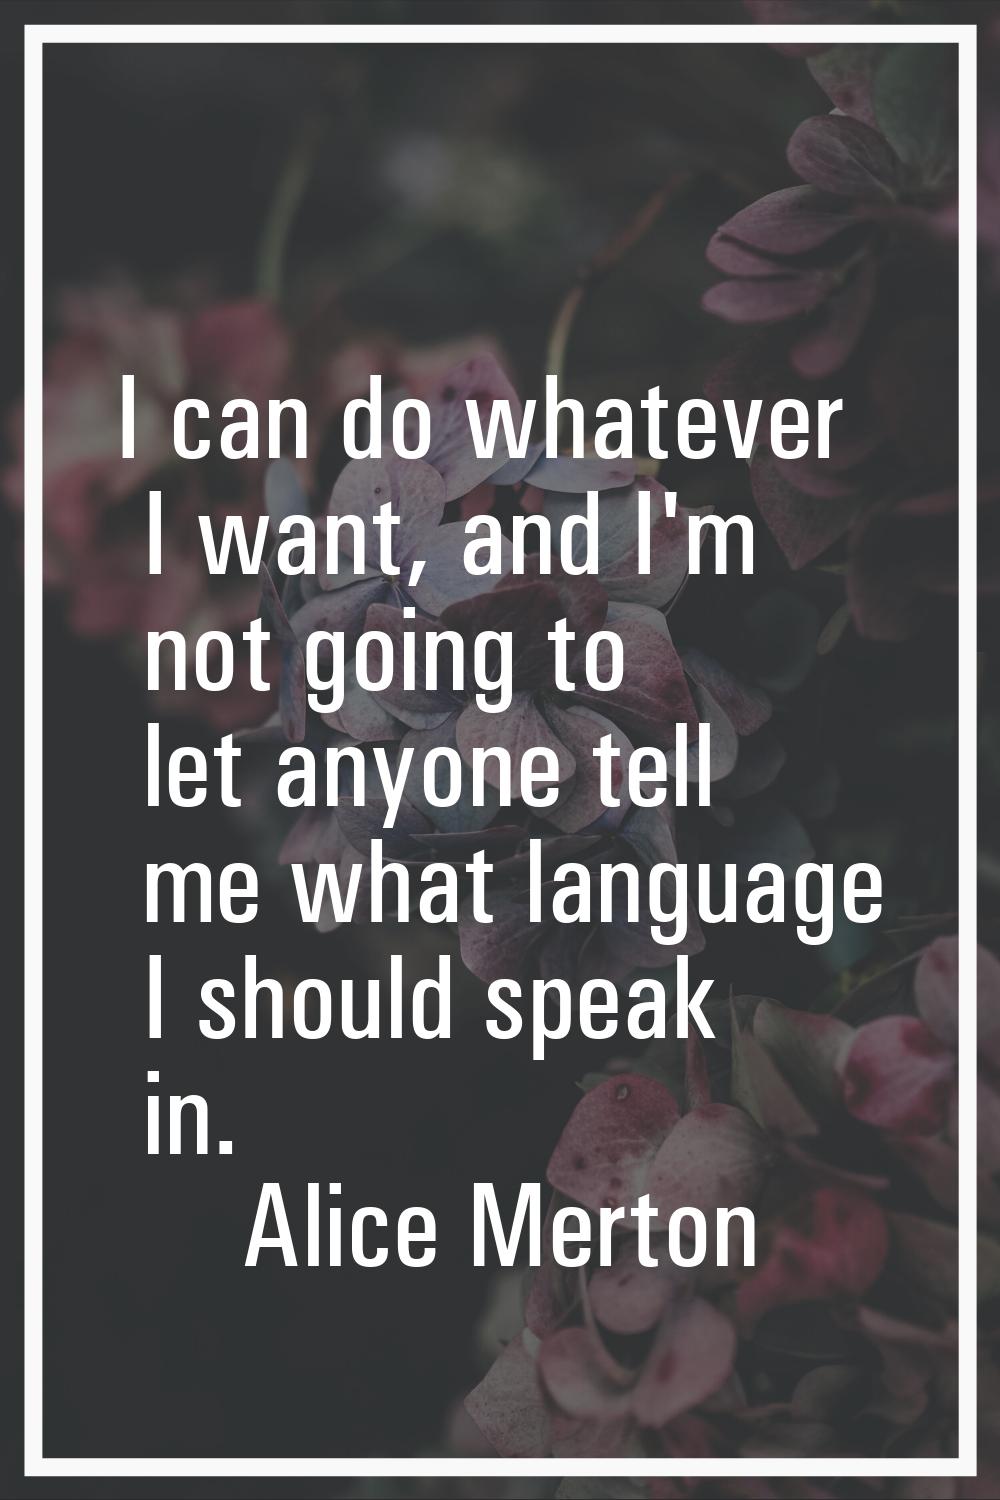 I can do whatever I want, and I'm not going to let anyone tell me what language I should speak in.